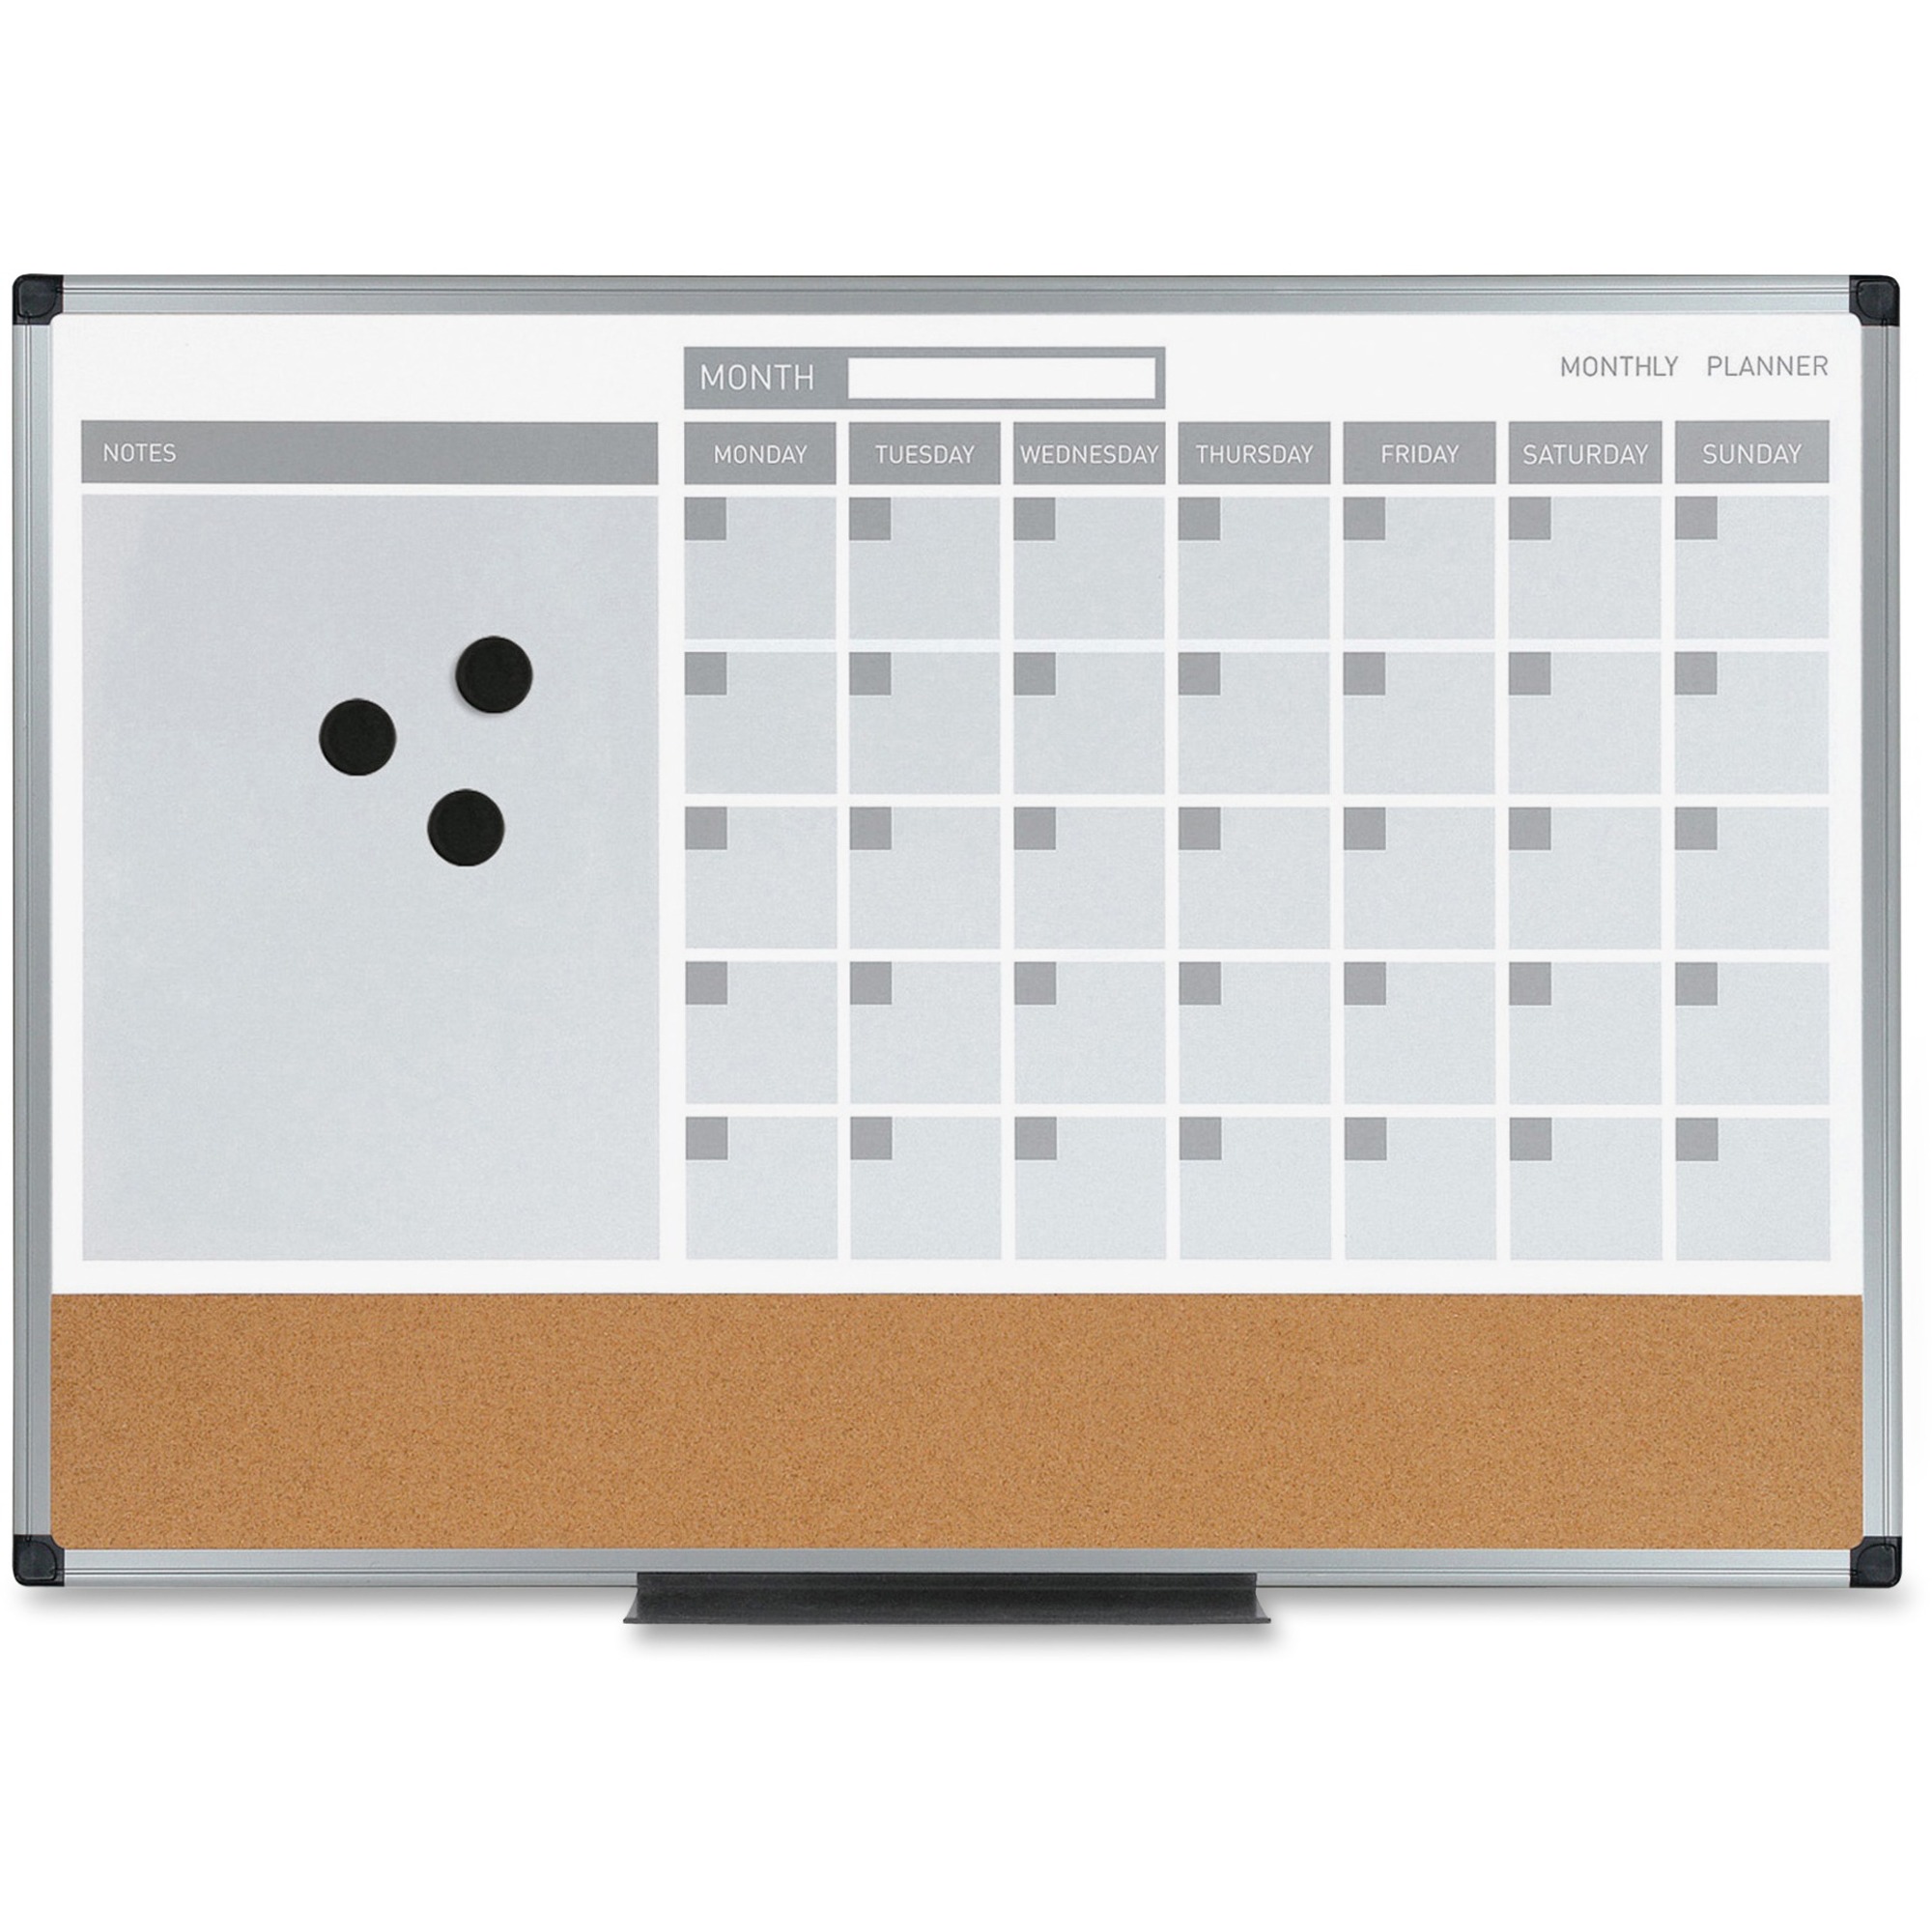 MasterVision 3 in 1 Combo Monthly Calendar Board Monthly 4 Month